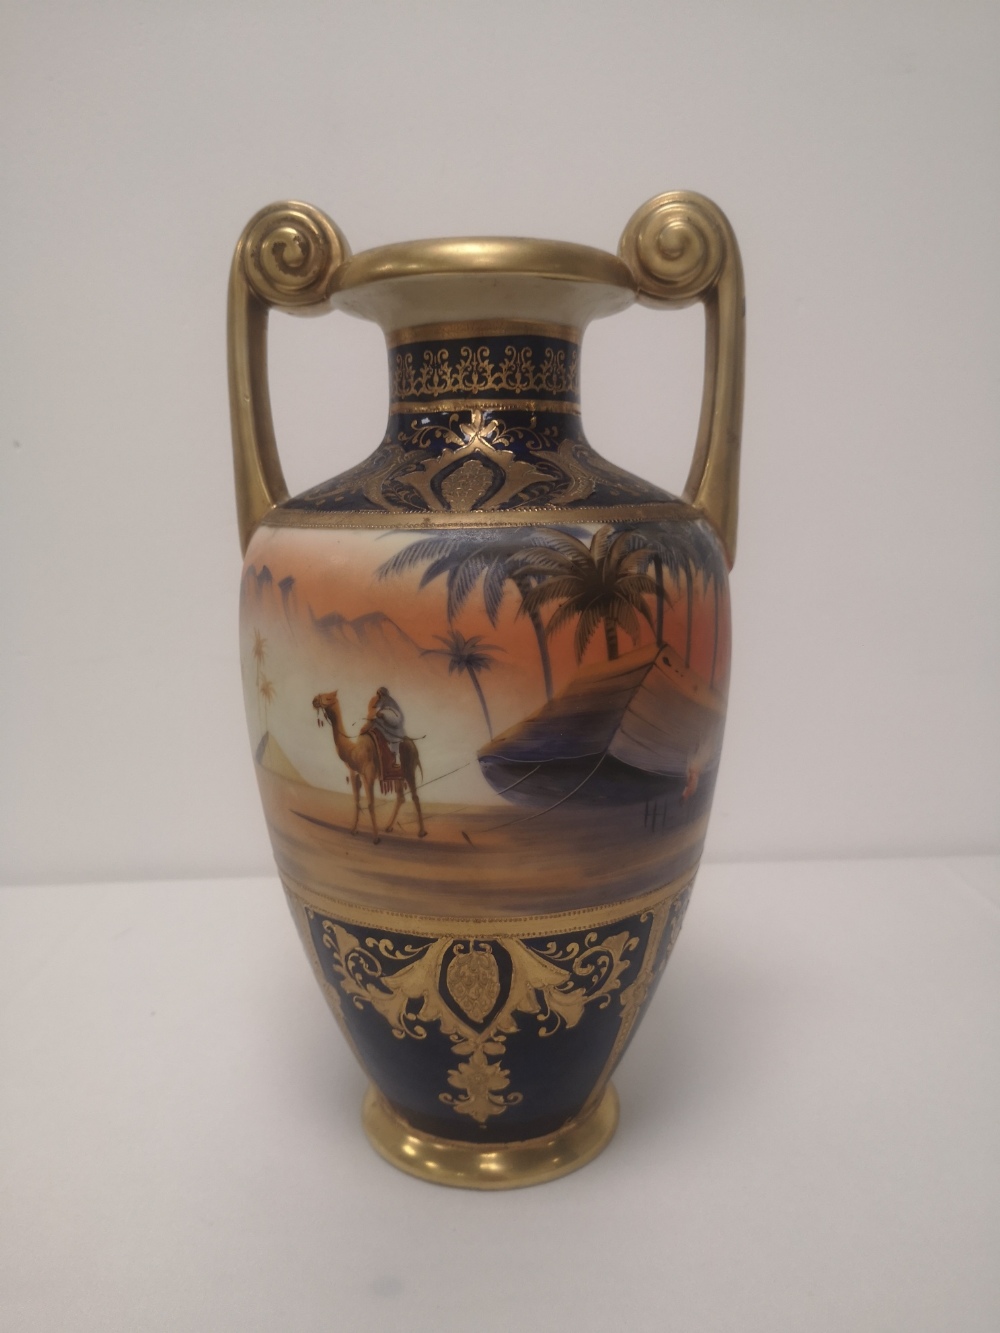 A Noritake vase painted with a camel in desert scene, 11" high.